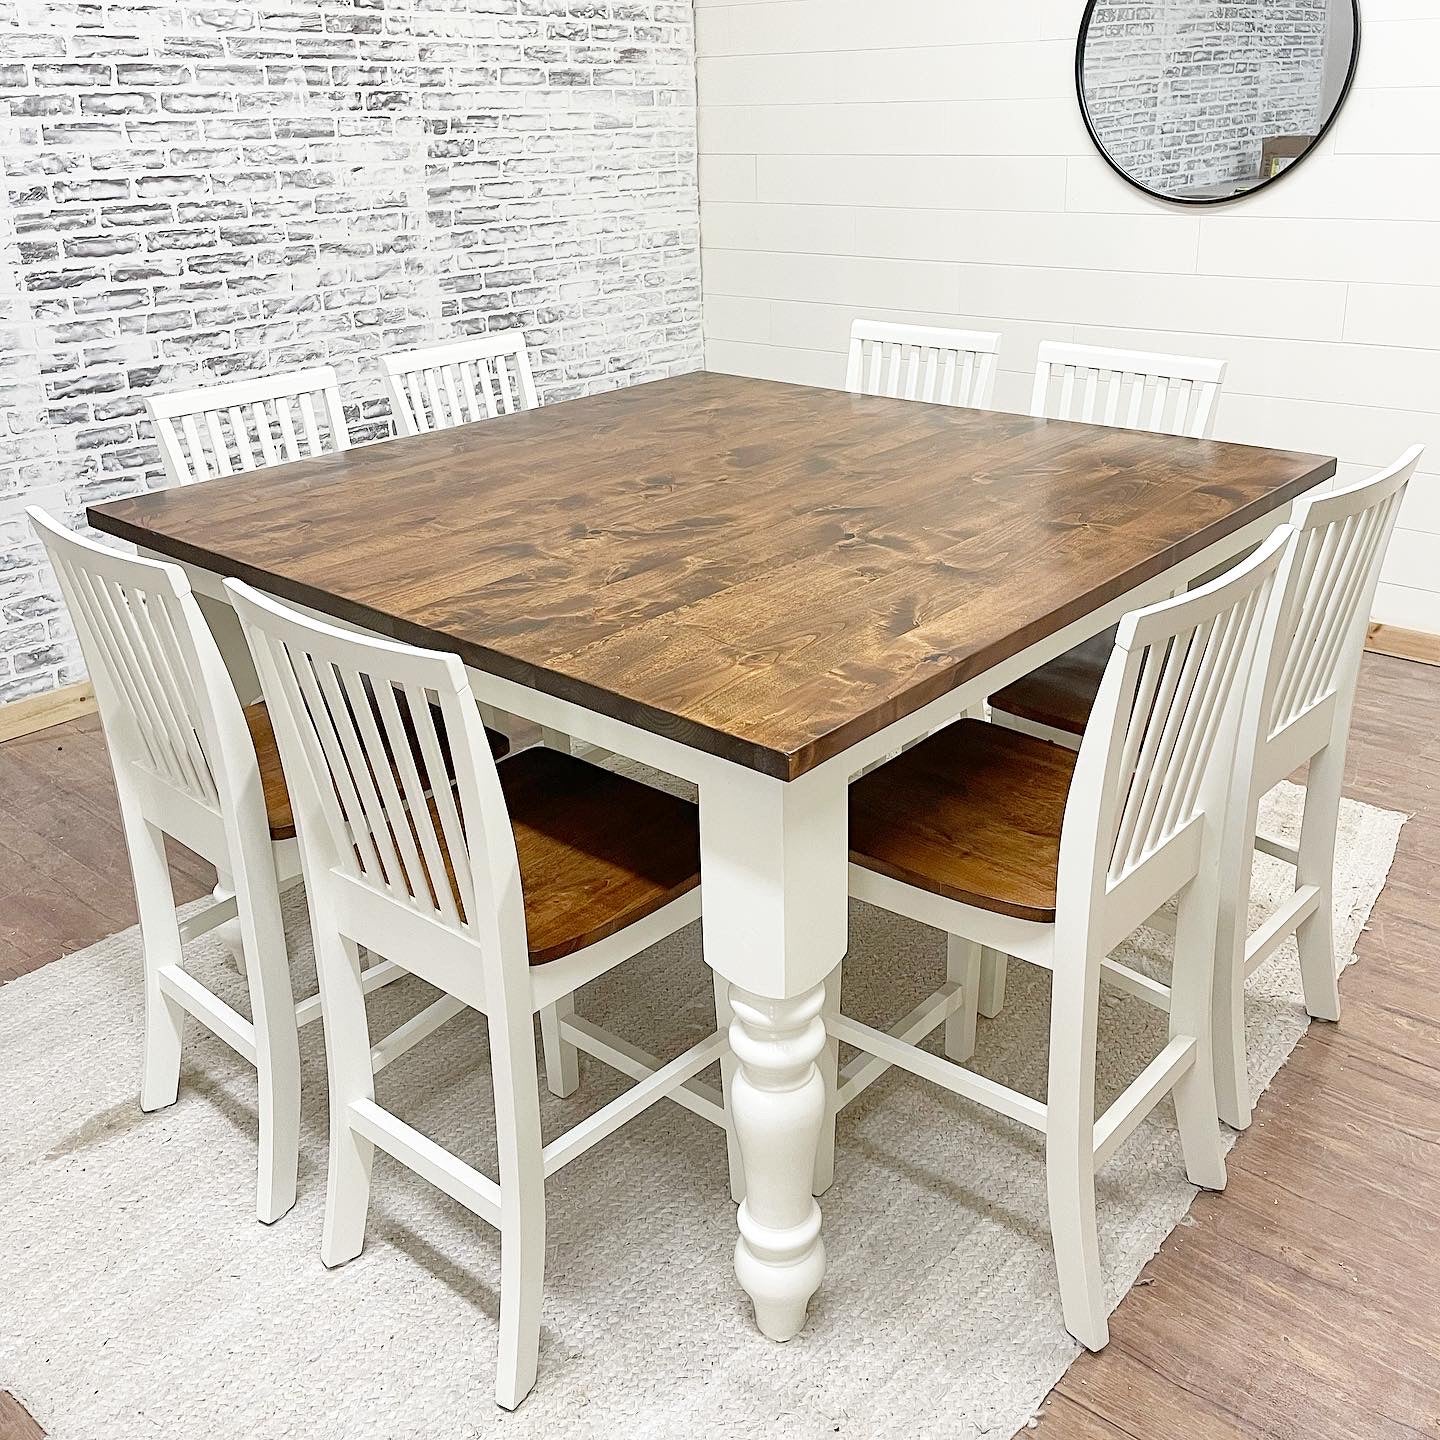 Pictured with a 60" W Square Rustic Alder table stained Honey. Pictured with 8 Mission Counter Height Stools.